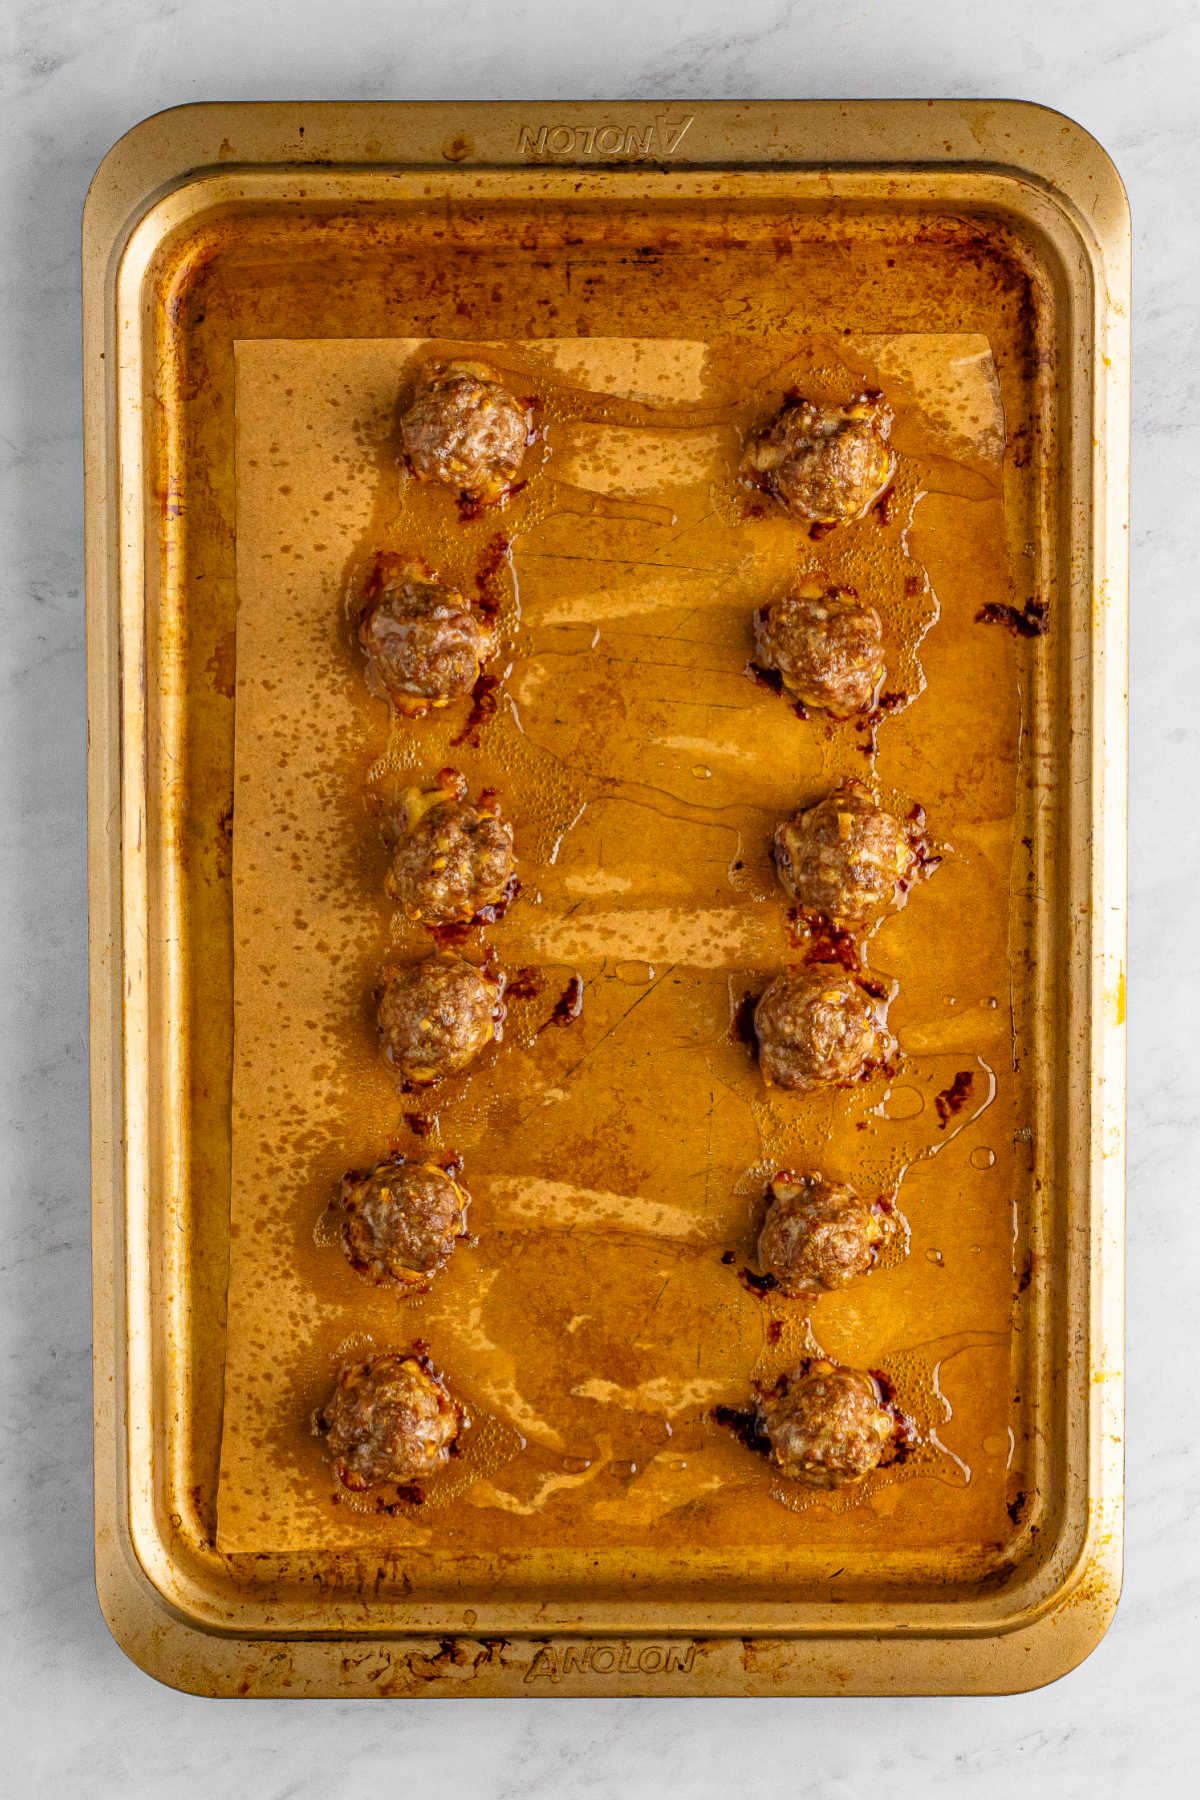 Freshly cooked meatballs on the pan, showing their browned color, ready to be made into sliders.